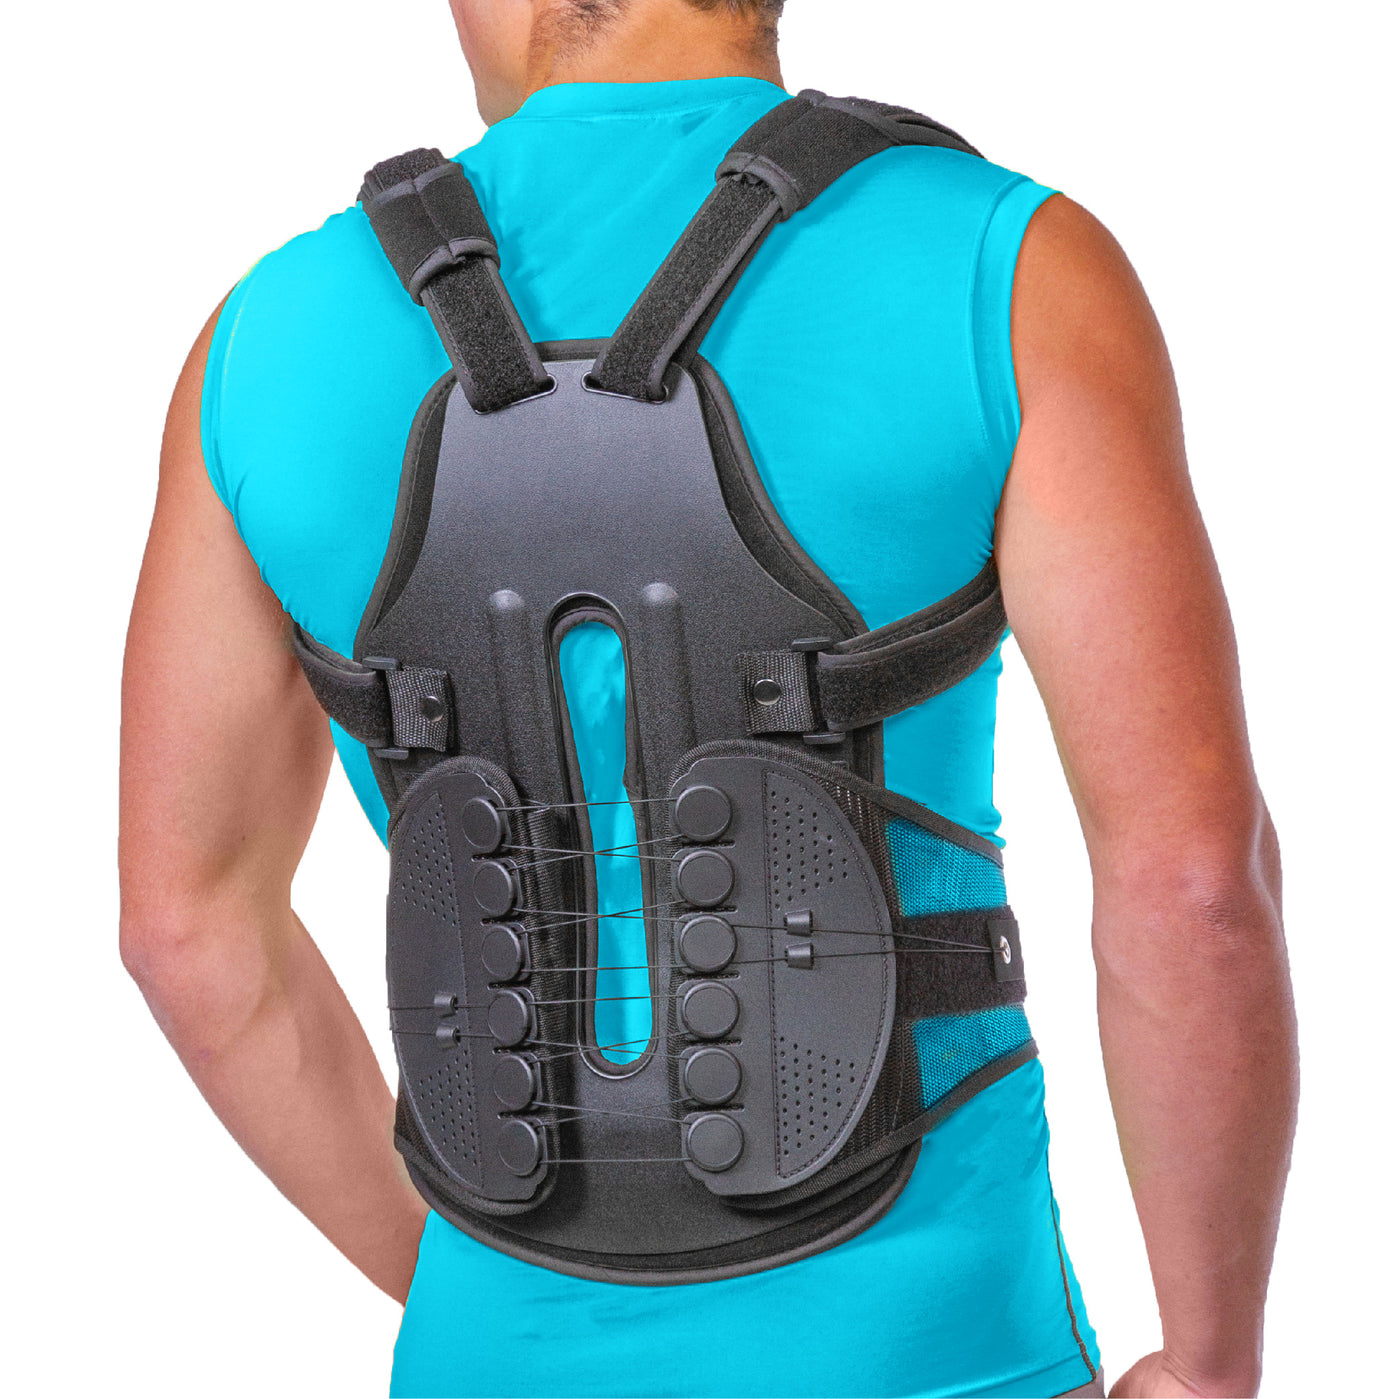 TLSO Thoracic Back Brace,Back Support and Back Pain Relief for  Fractures,Post Op,Herniated Disc,Spinal Trauma,Scoliosis